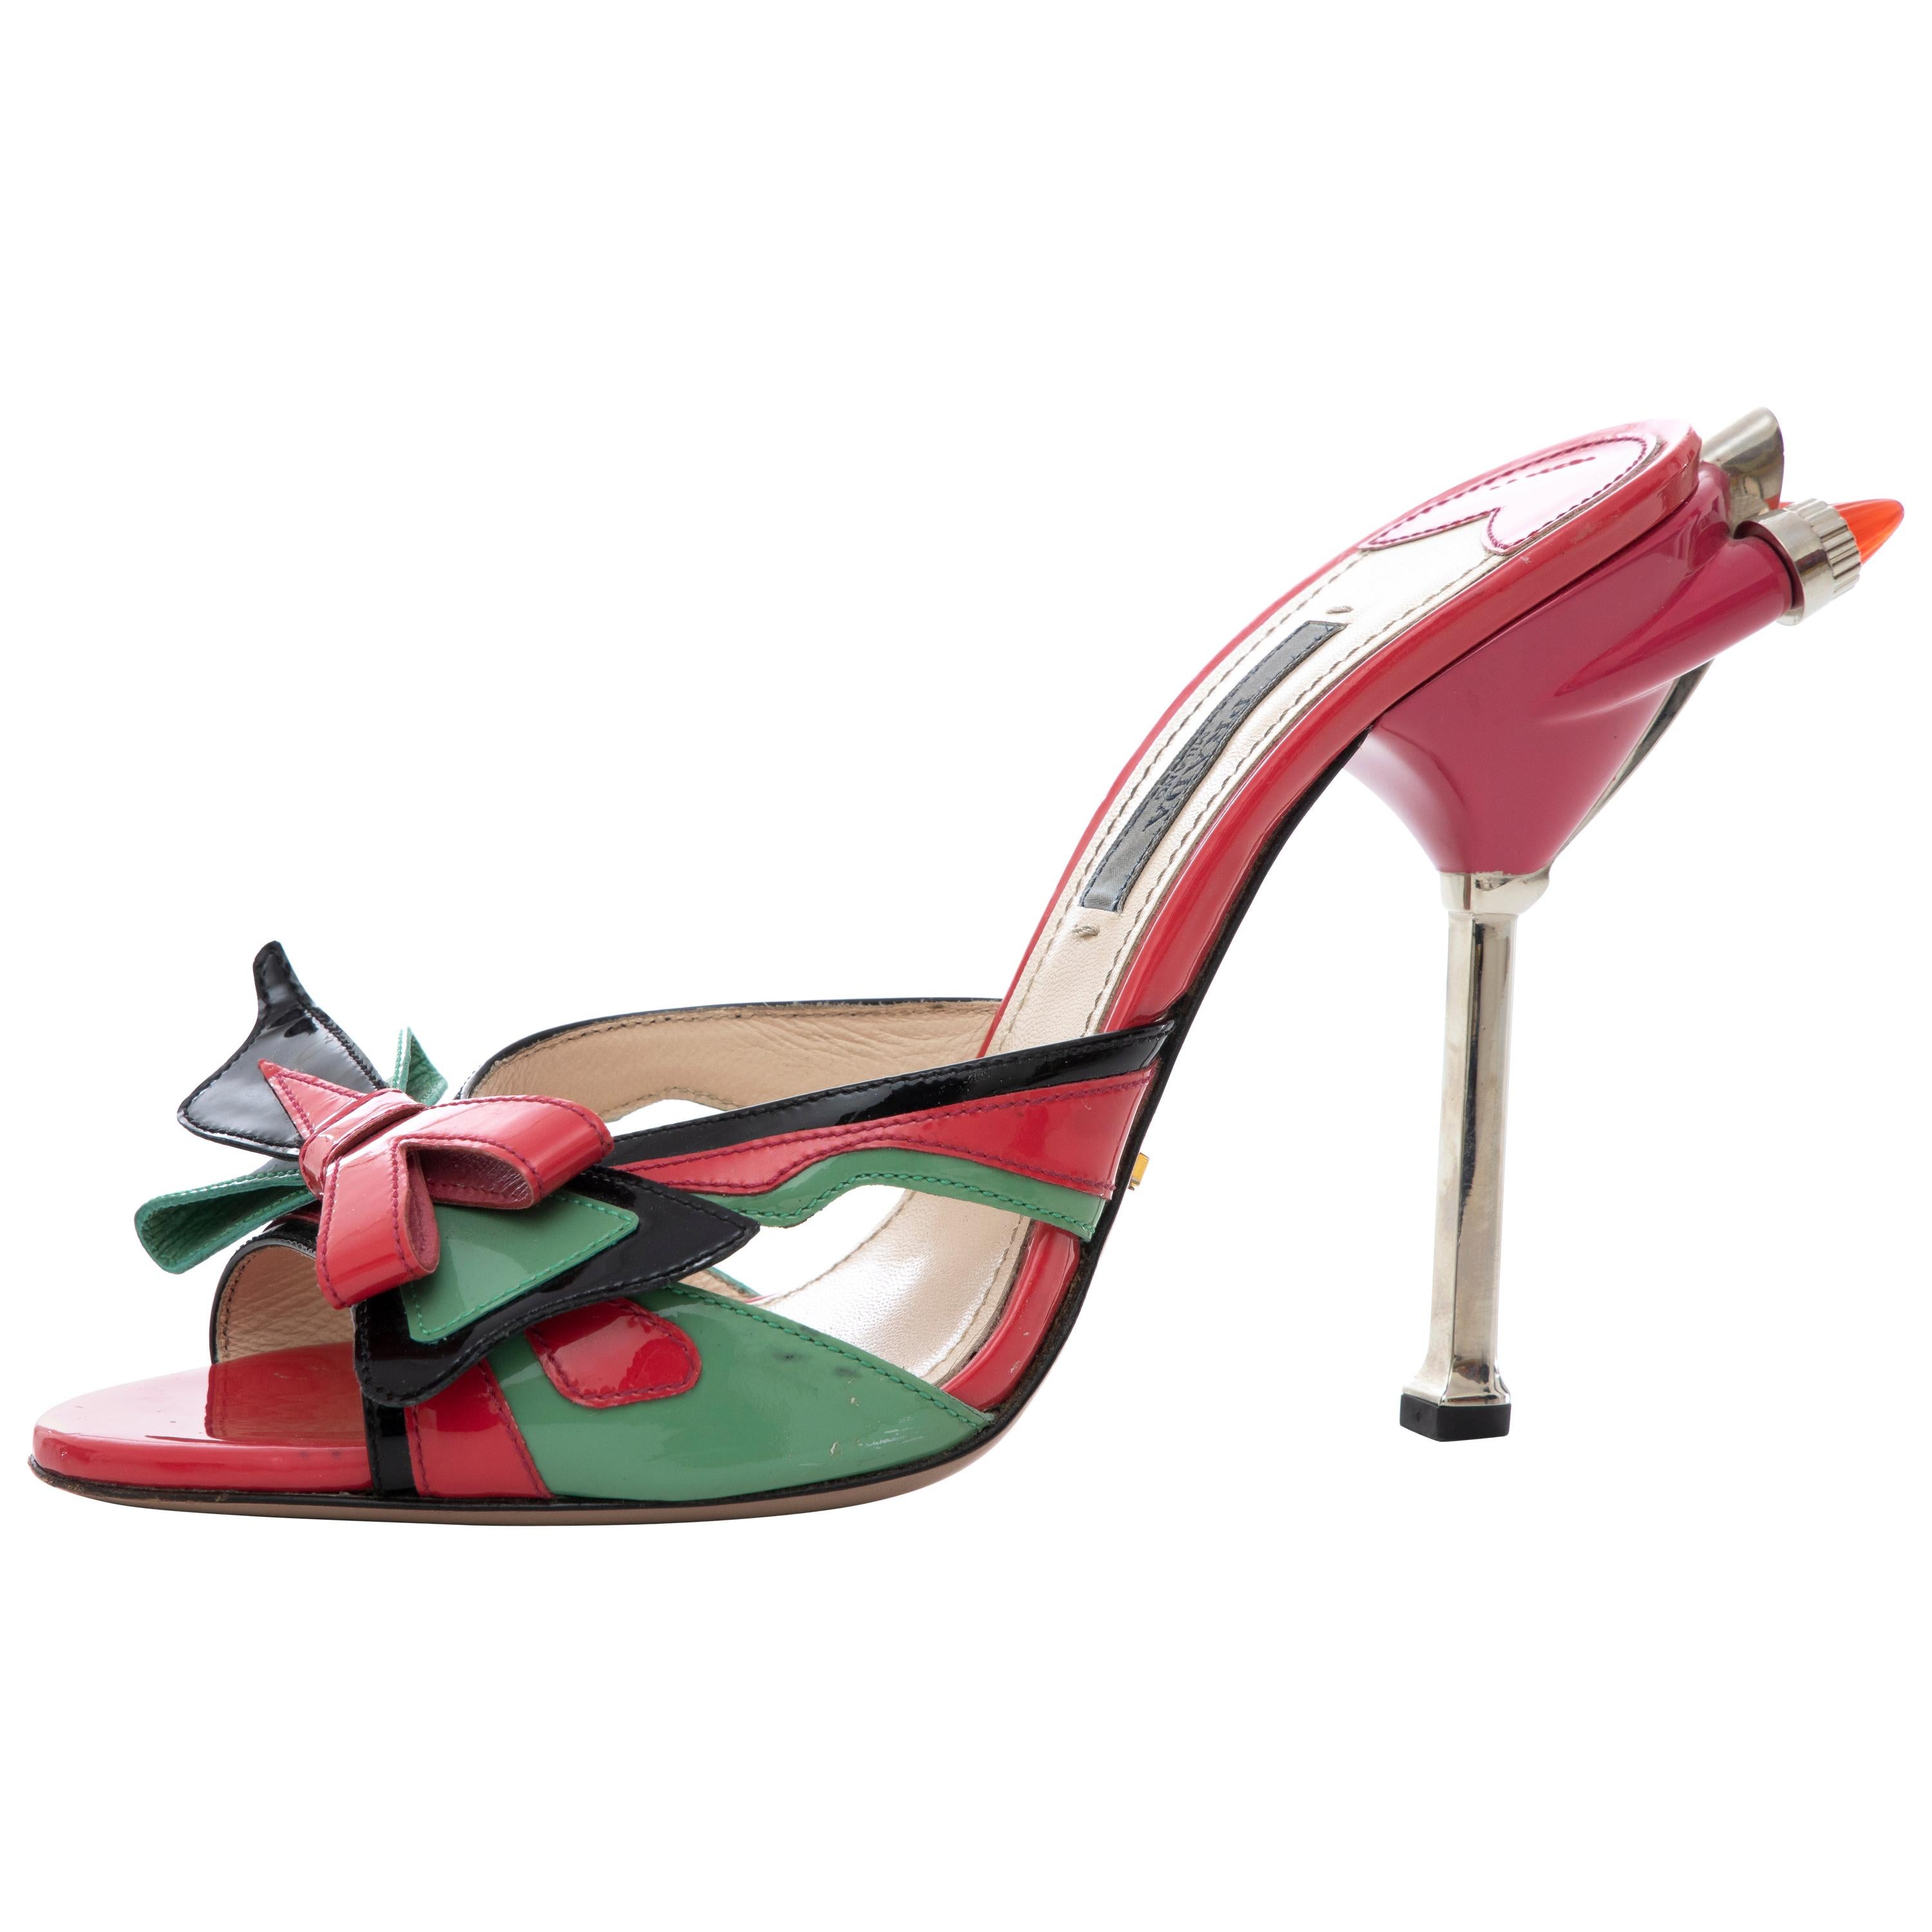 Prada Runway Patent Leather Tail Light Sandal, Spring 2012 For Sale